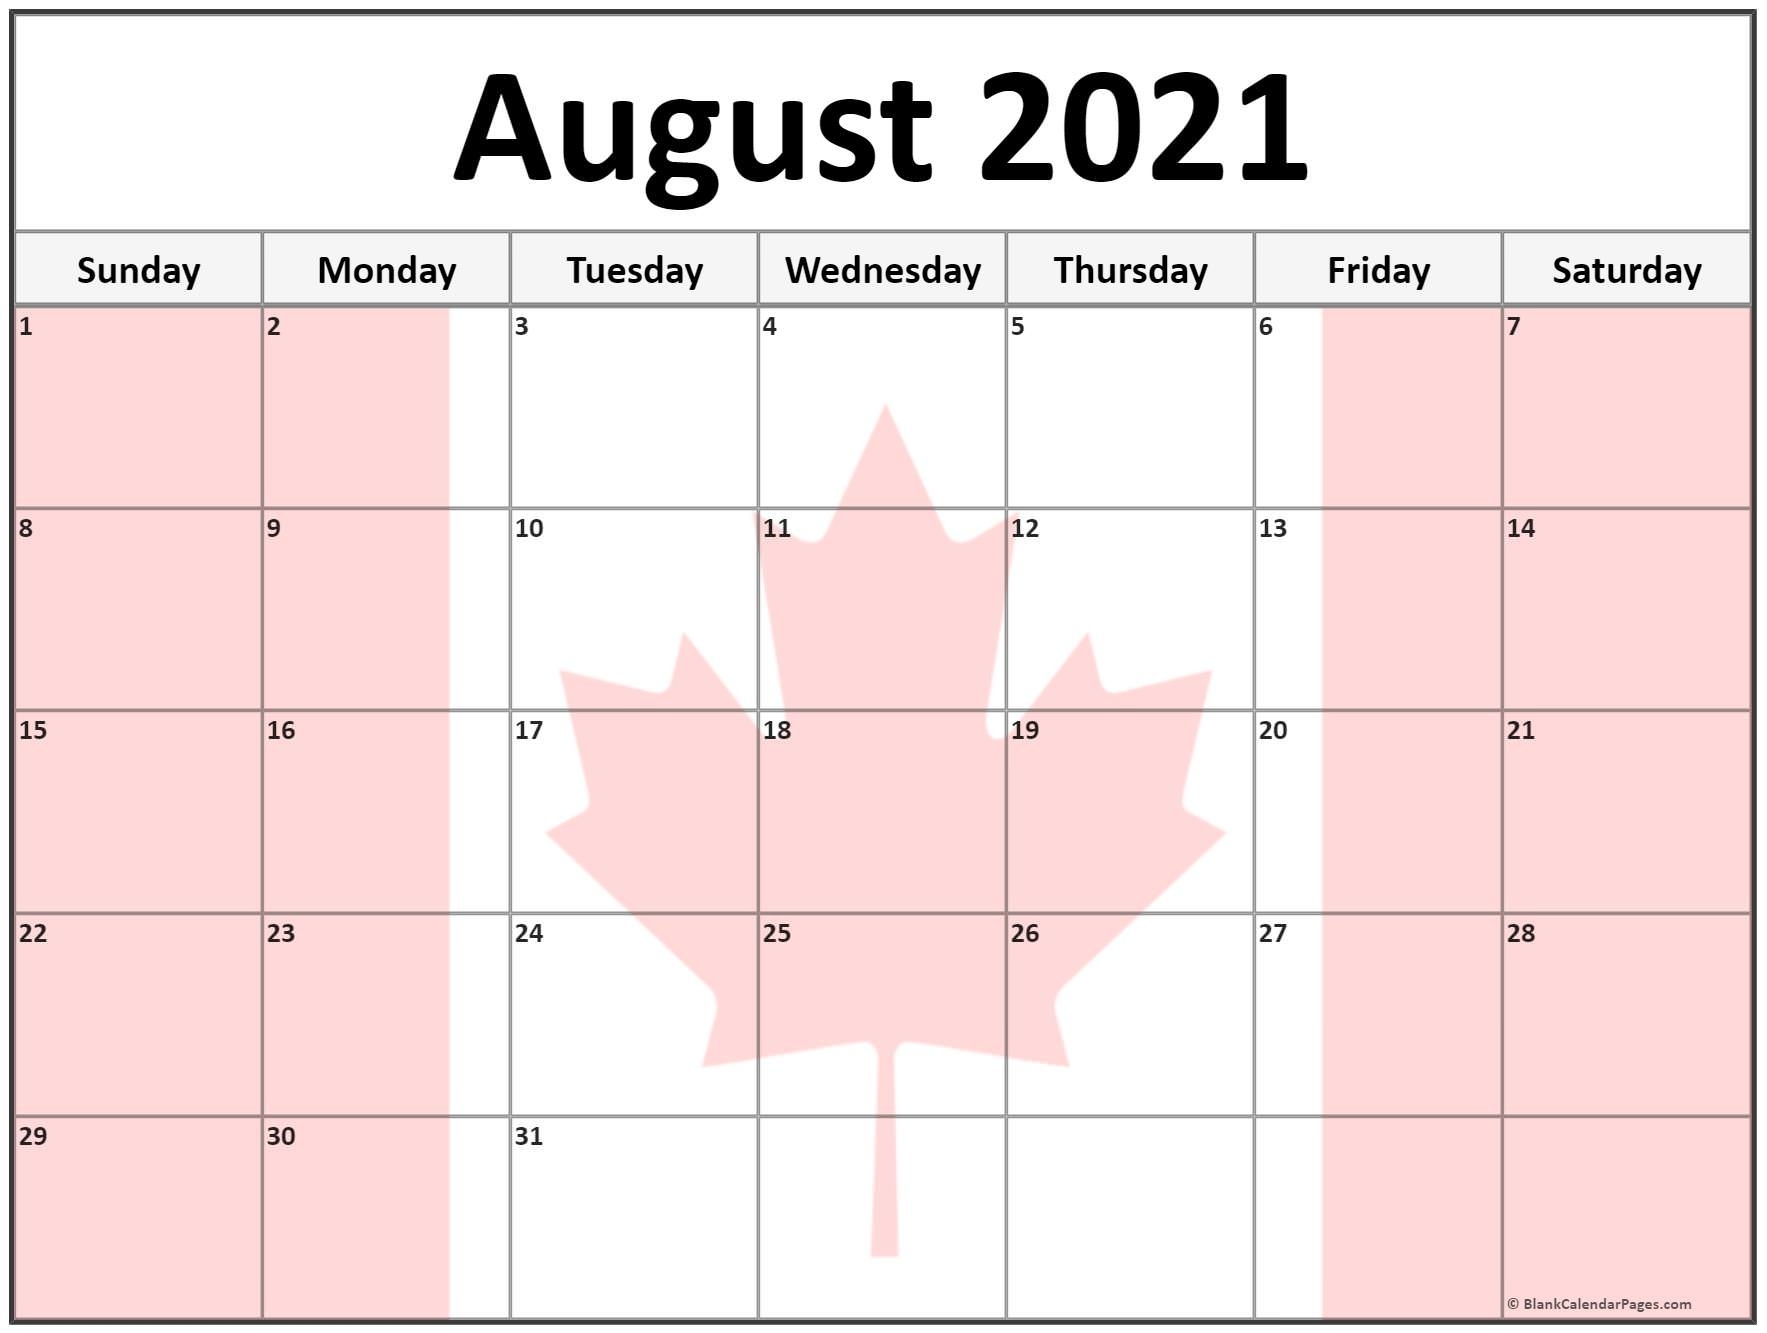 Collection Of August 2021 Photo Calendars With Image Filters. August 2021 Calendar Quotes